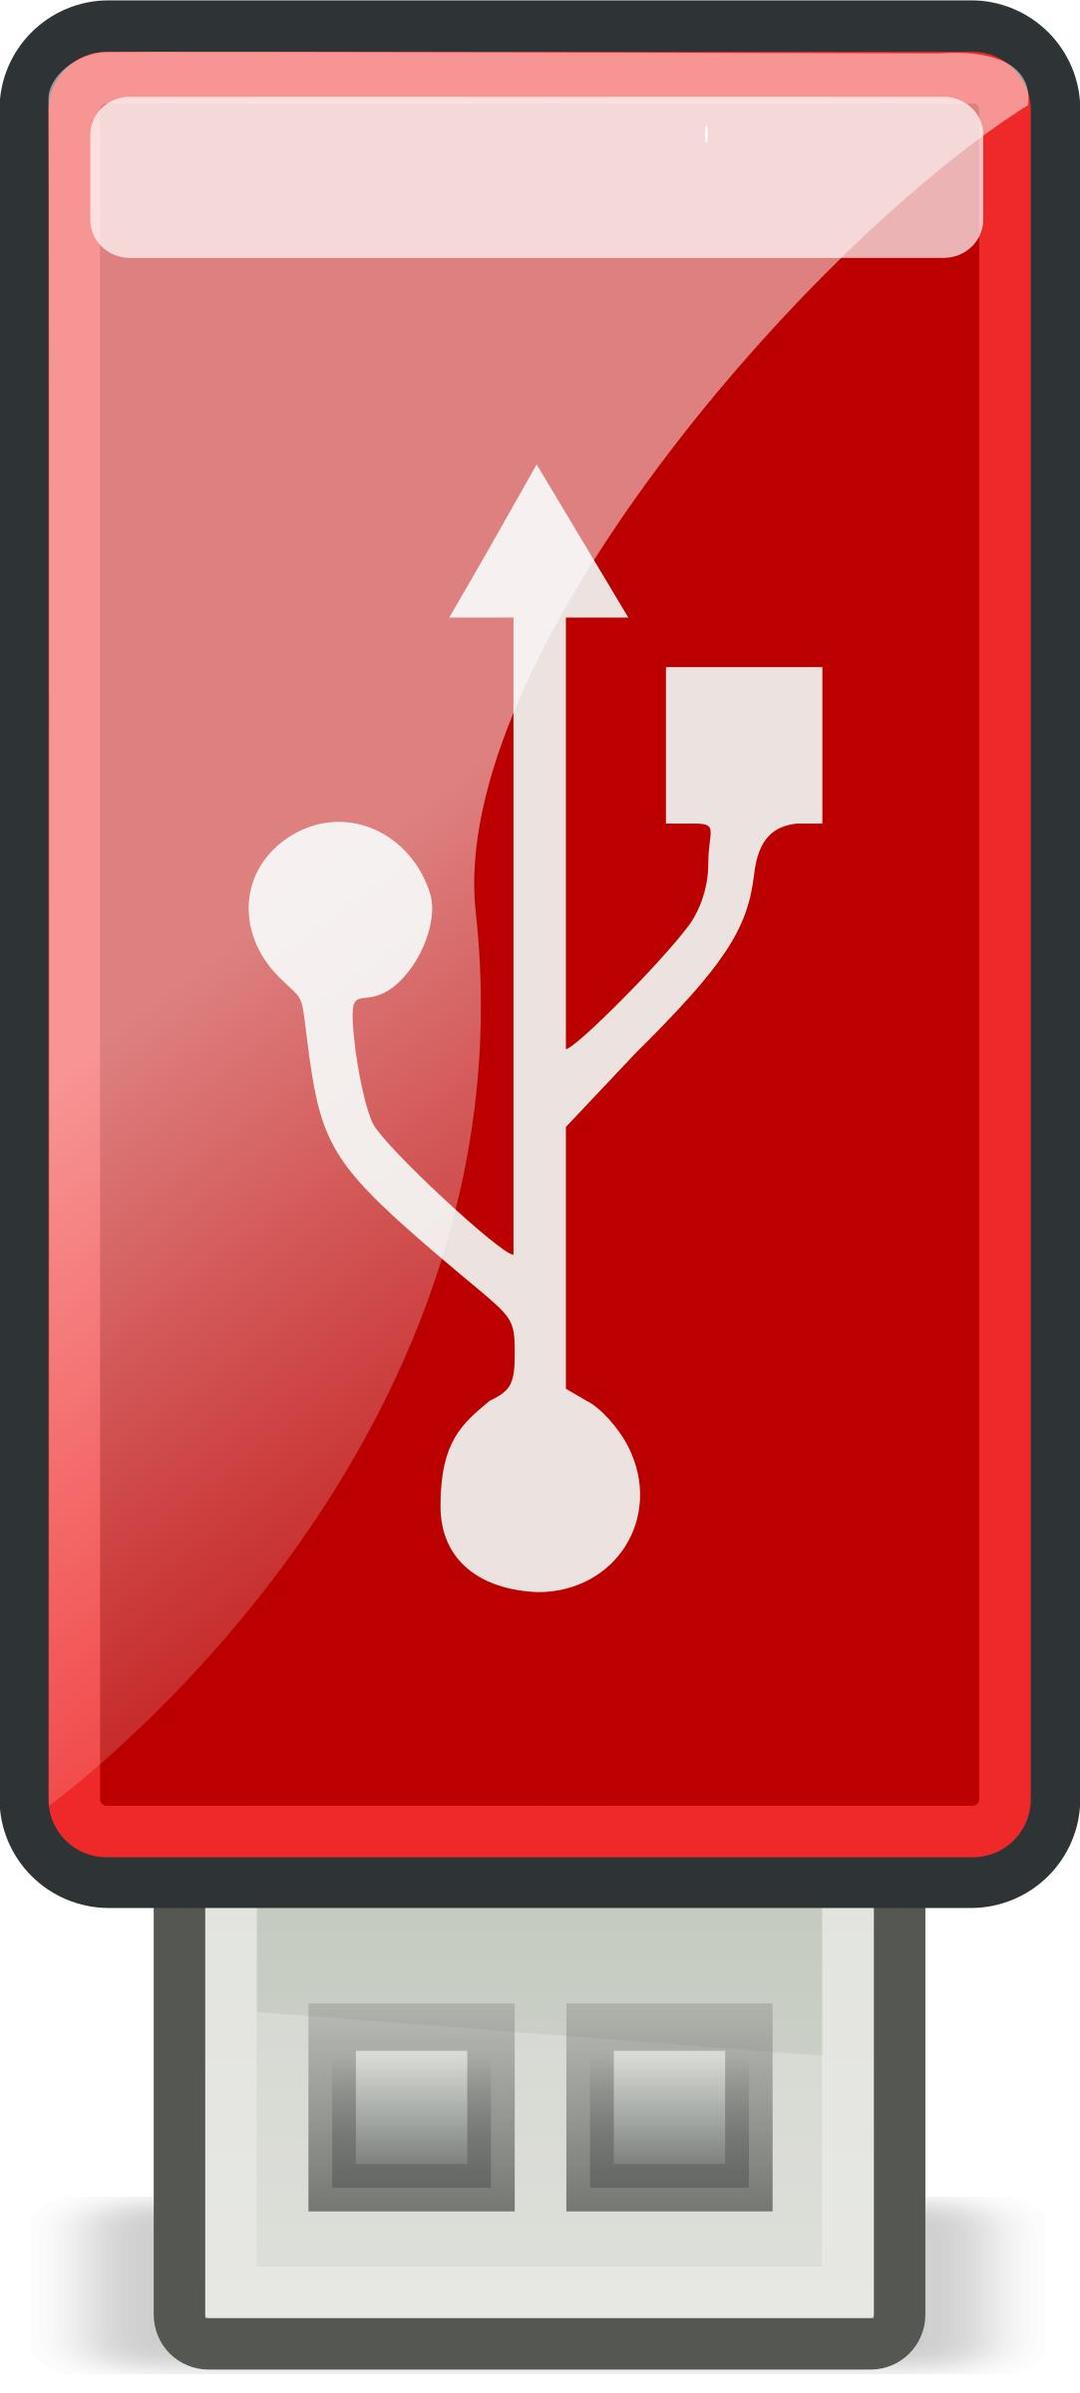 USB Red - Tango style png transparent